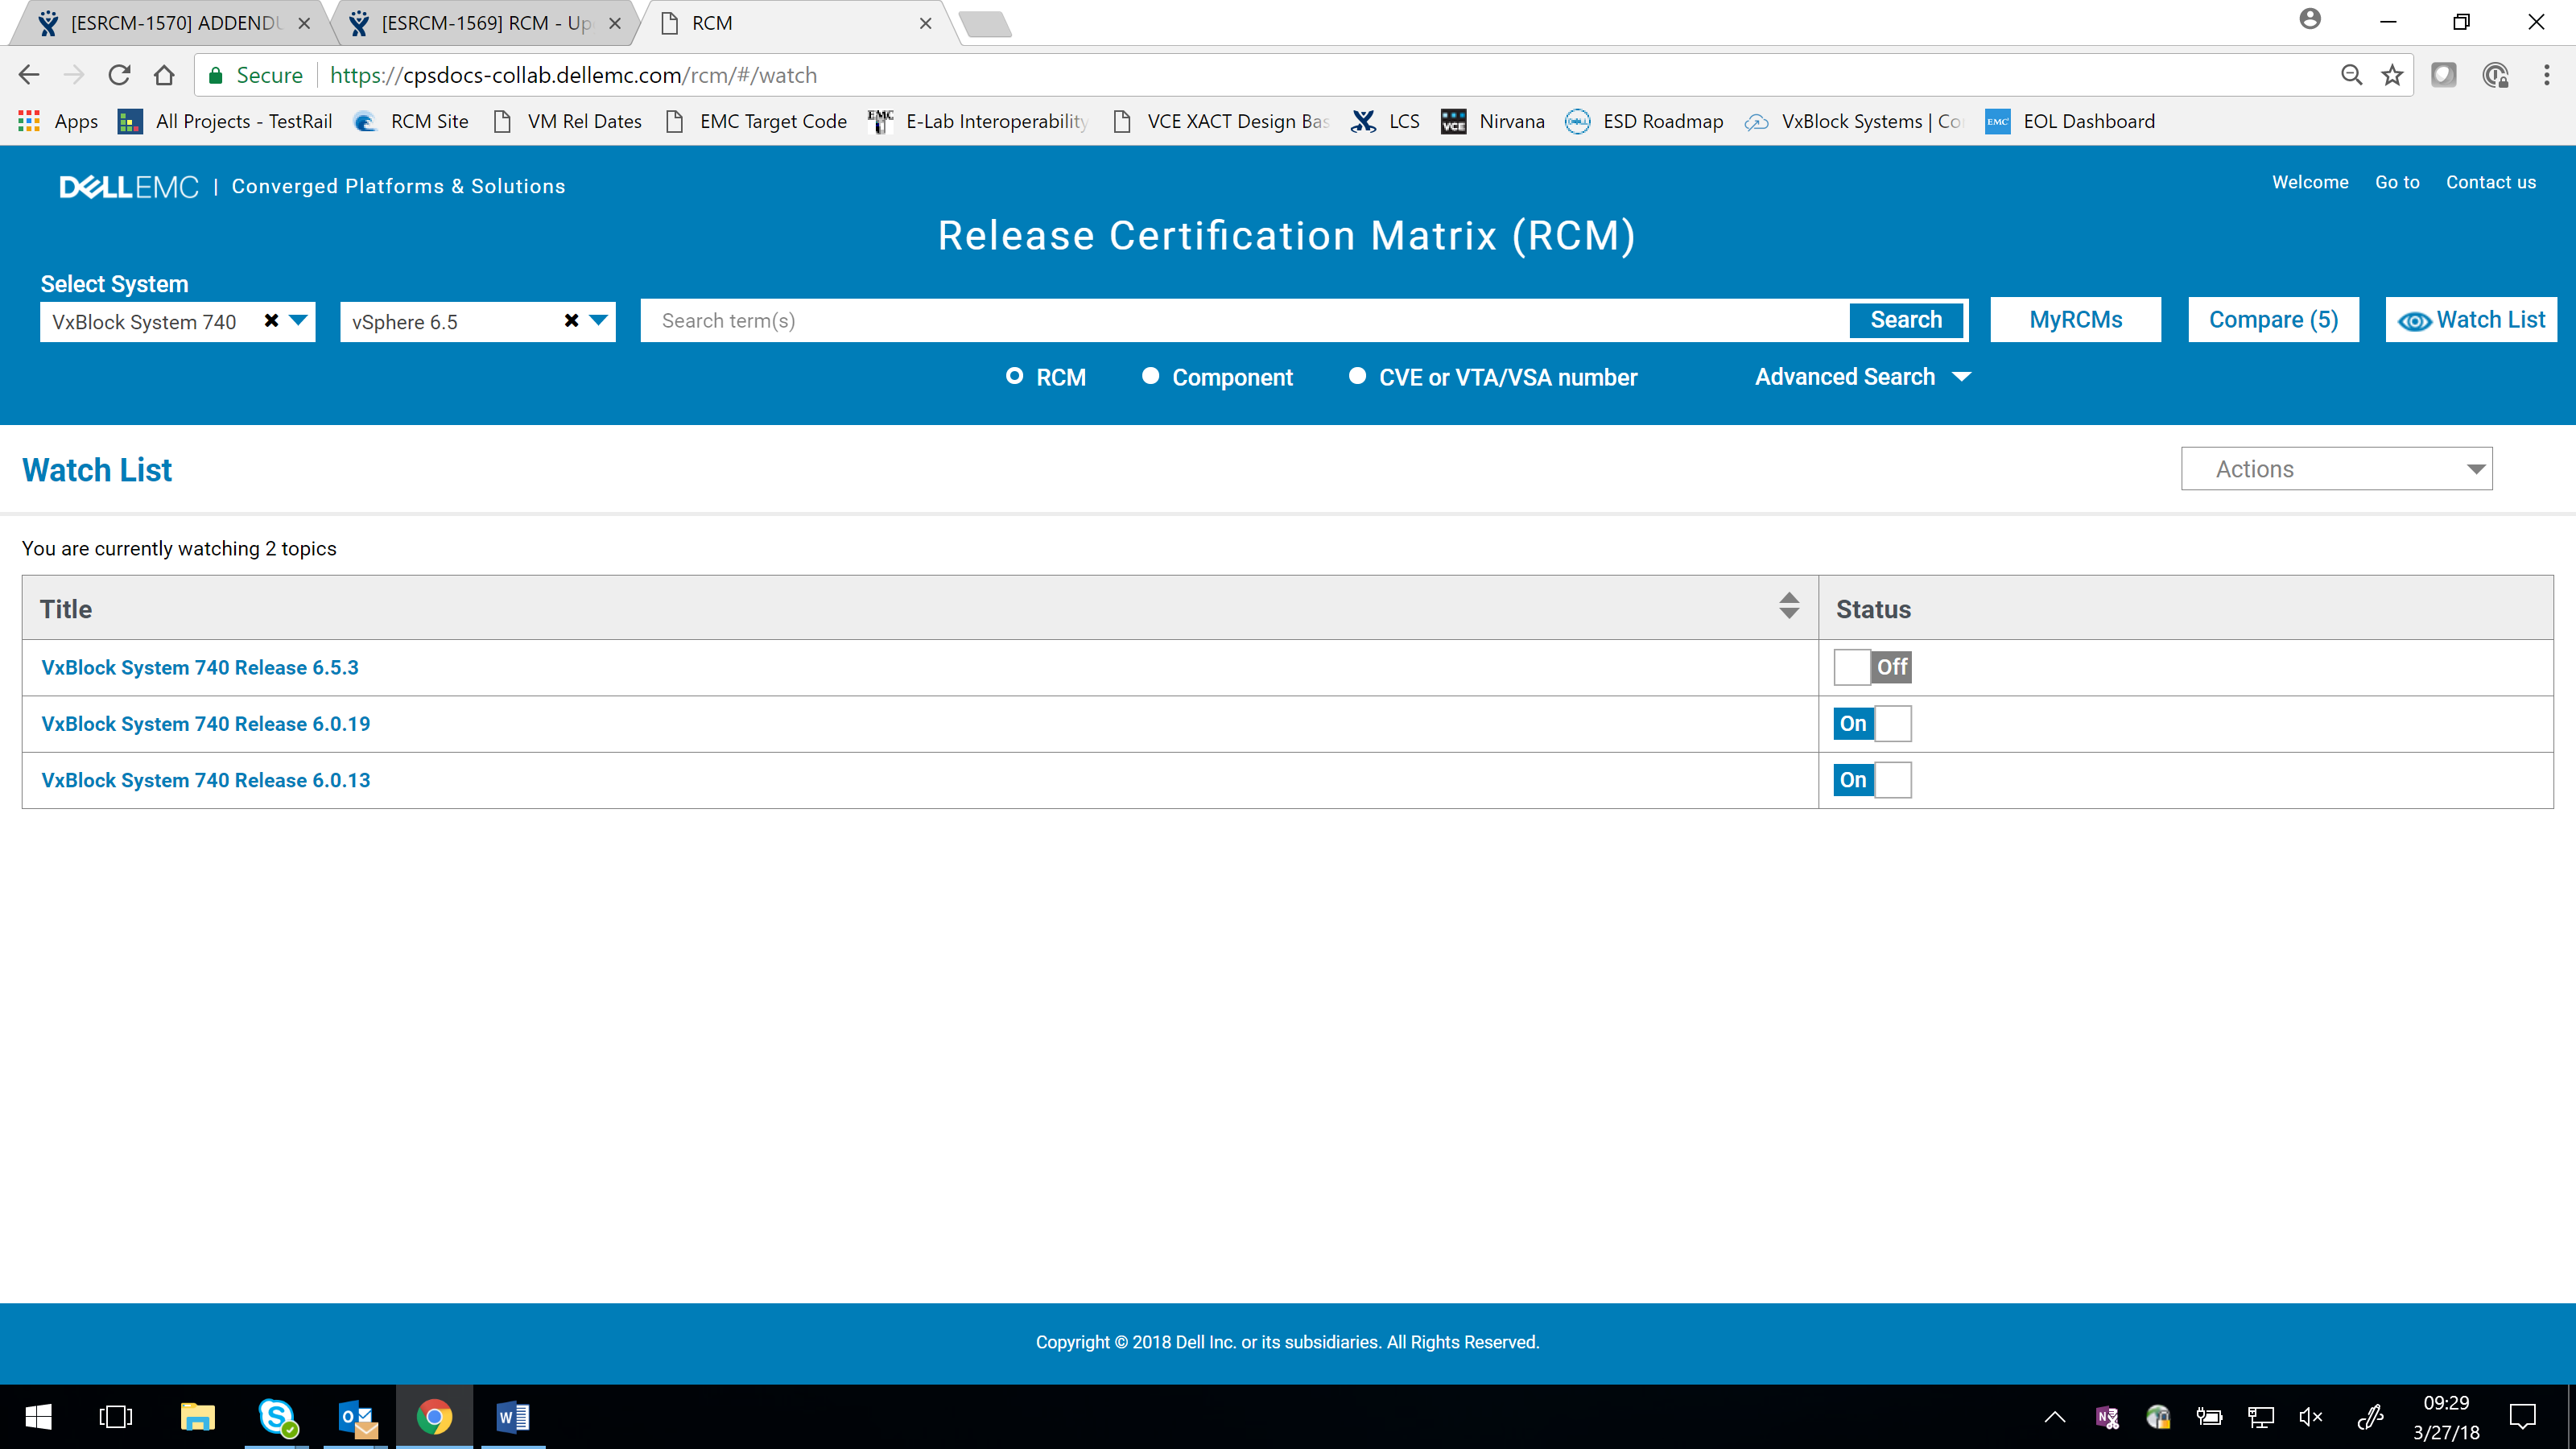 Figure 2: RCM Watch Lists allow users to select a system type and RCM combination to follow allowing them to get notified with information important to them. 